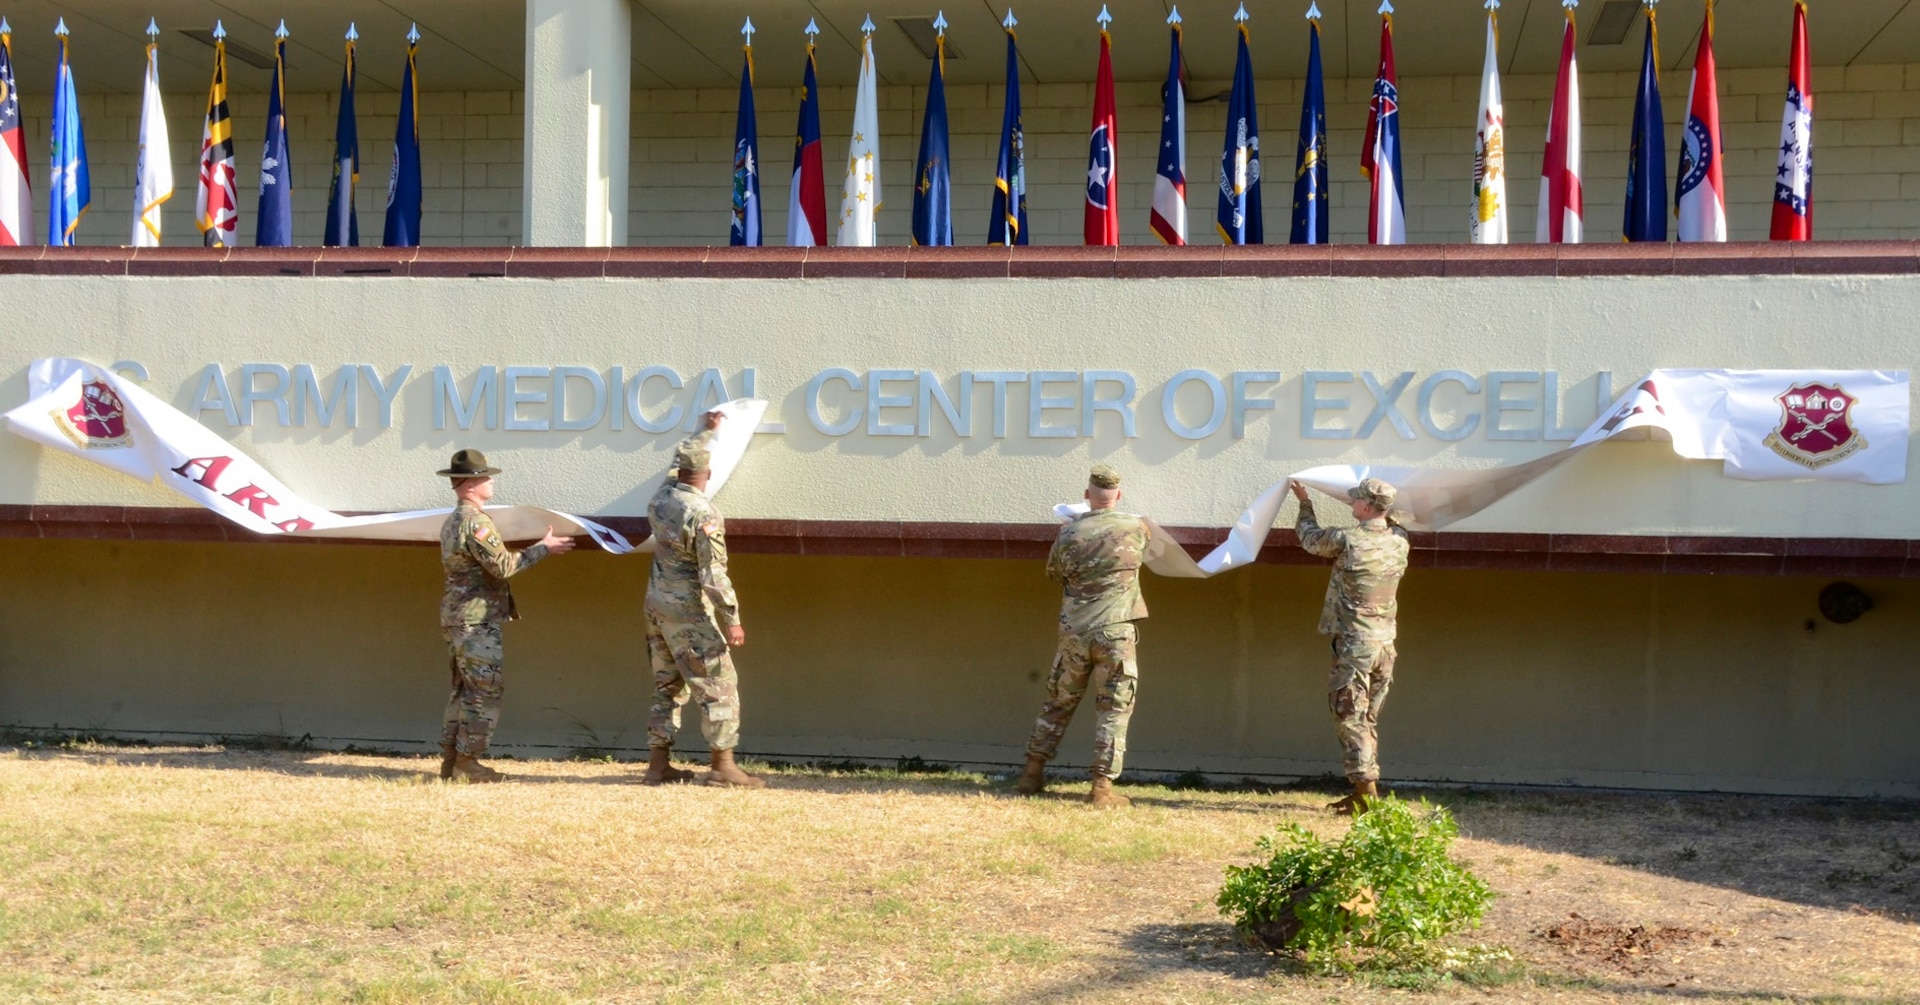 U.S. Army Medical Center of Excellence command team Maj. Gen. Patrick D. Sargent and Command Sgt. Maj. William "Buck" O'Neal were assisted in unveiling the new name by Senior Drill Sergeant Kyle Specht (far left) and Staff Sgt. Alexander Bach, the center’s 2019 Best Warrior winner (far right), at Joint Base San Antonio-Fort Sam Houston Sept. 16.